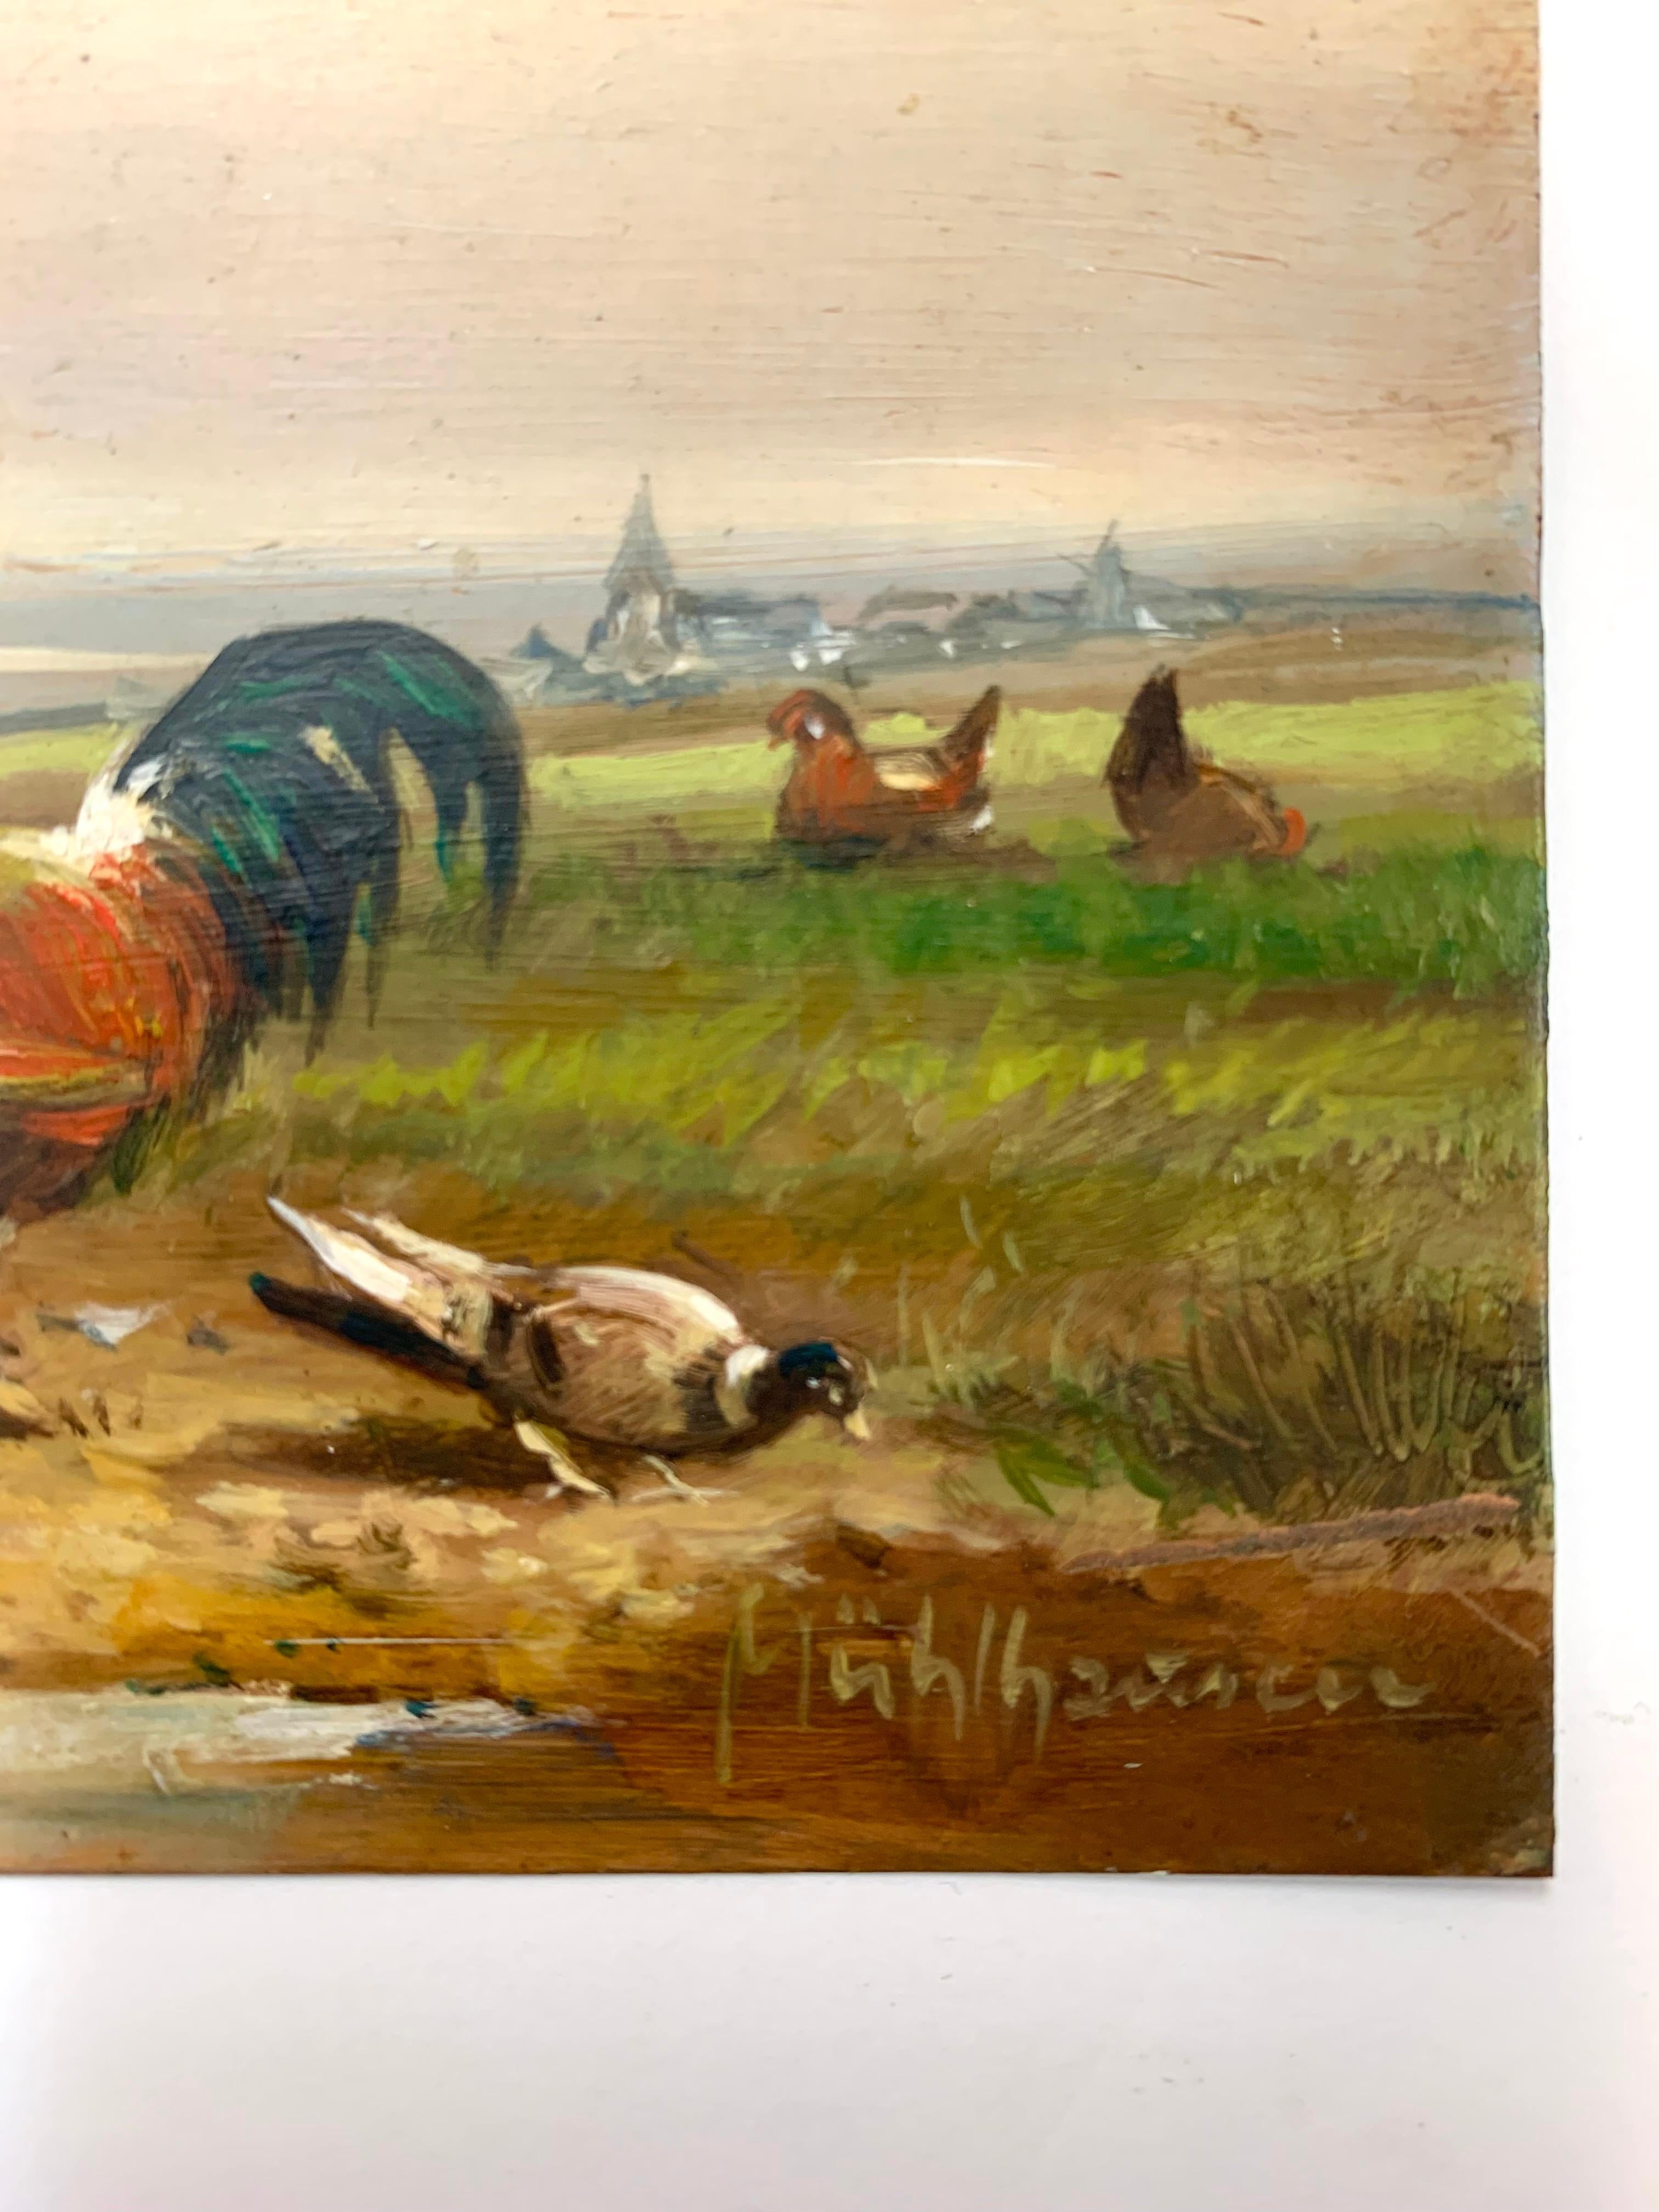 Artist: Hans-Ulrich Muhlhausen ( 1915-1987)
Title: Chickens and Pigeons
Medium: Oil on Copper 
Dimensions:  Unframed 8” x 6”

A small oil painting of a German agrarian landscape carefully executed on copperplate. The rooster dominates the foreground